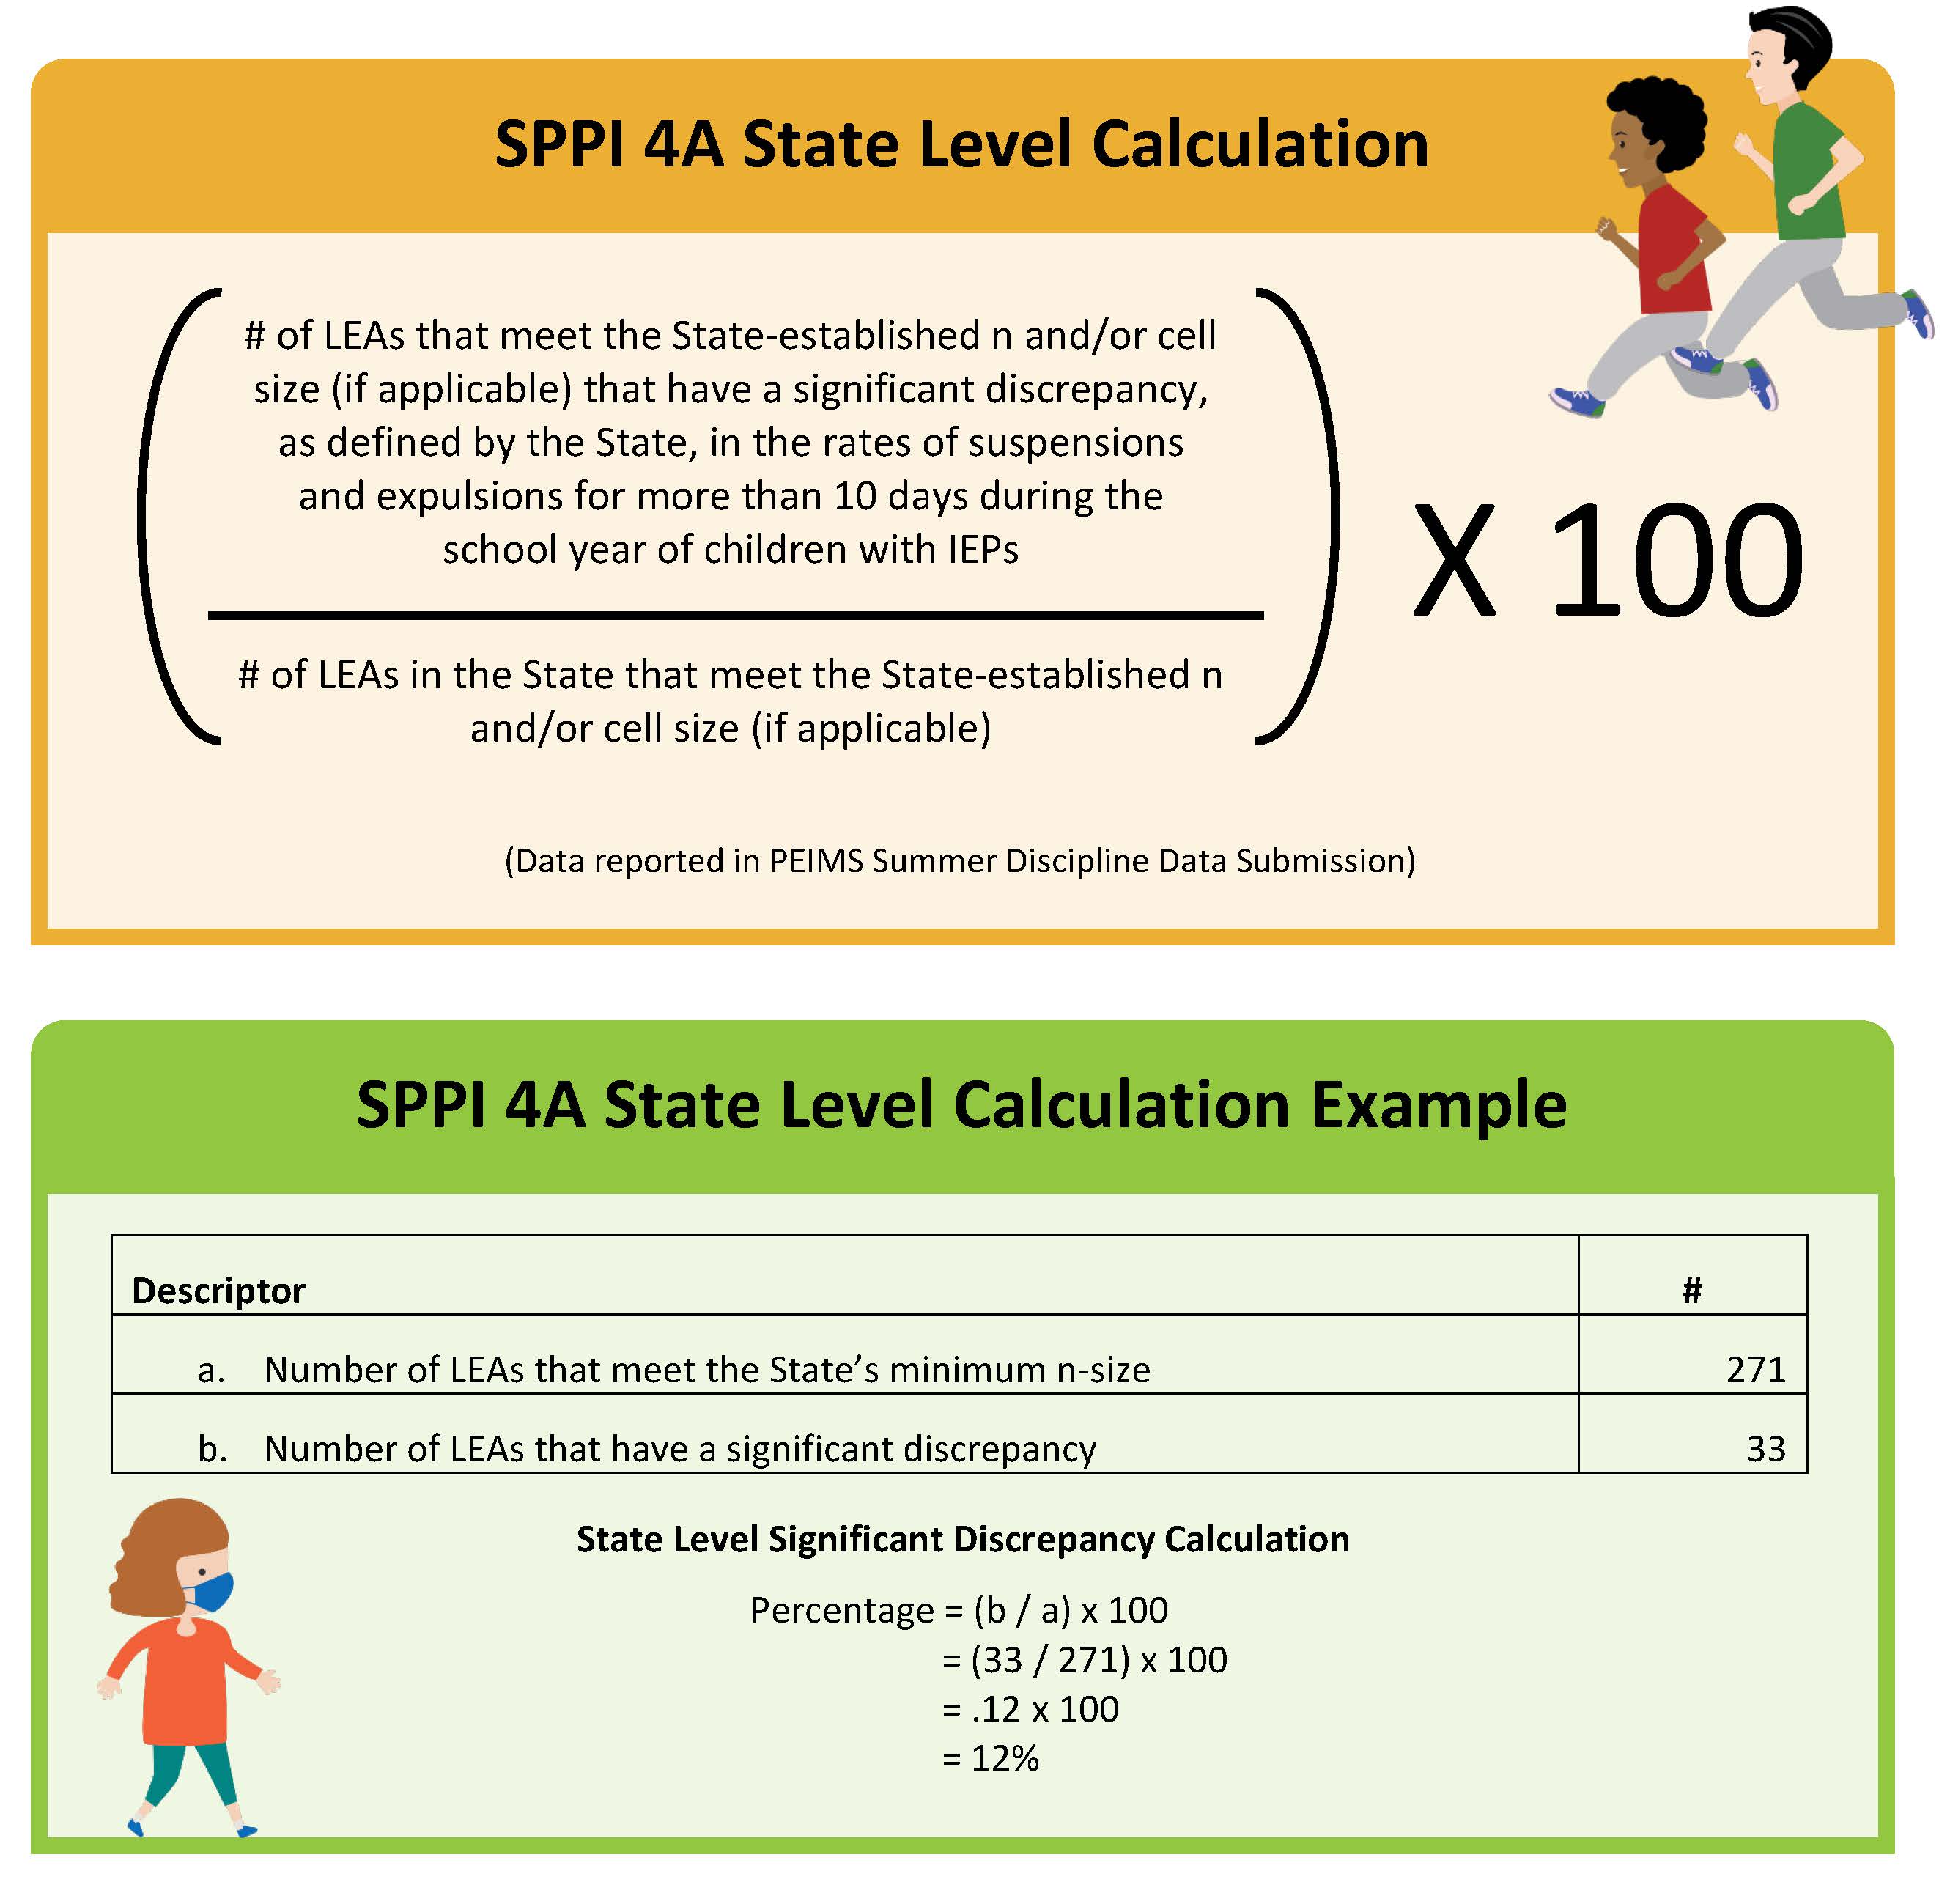 SPPI 4A Calculation and Example